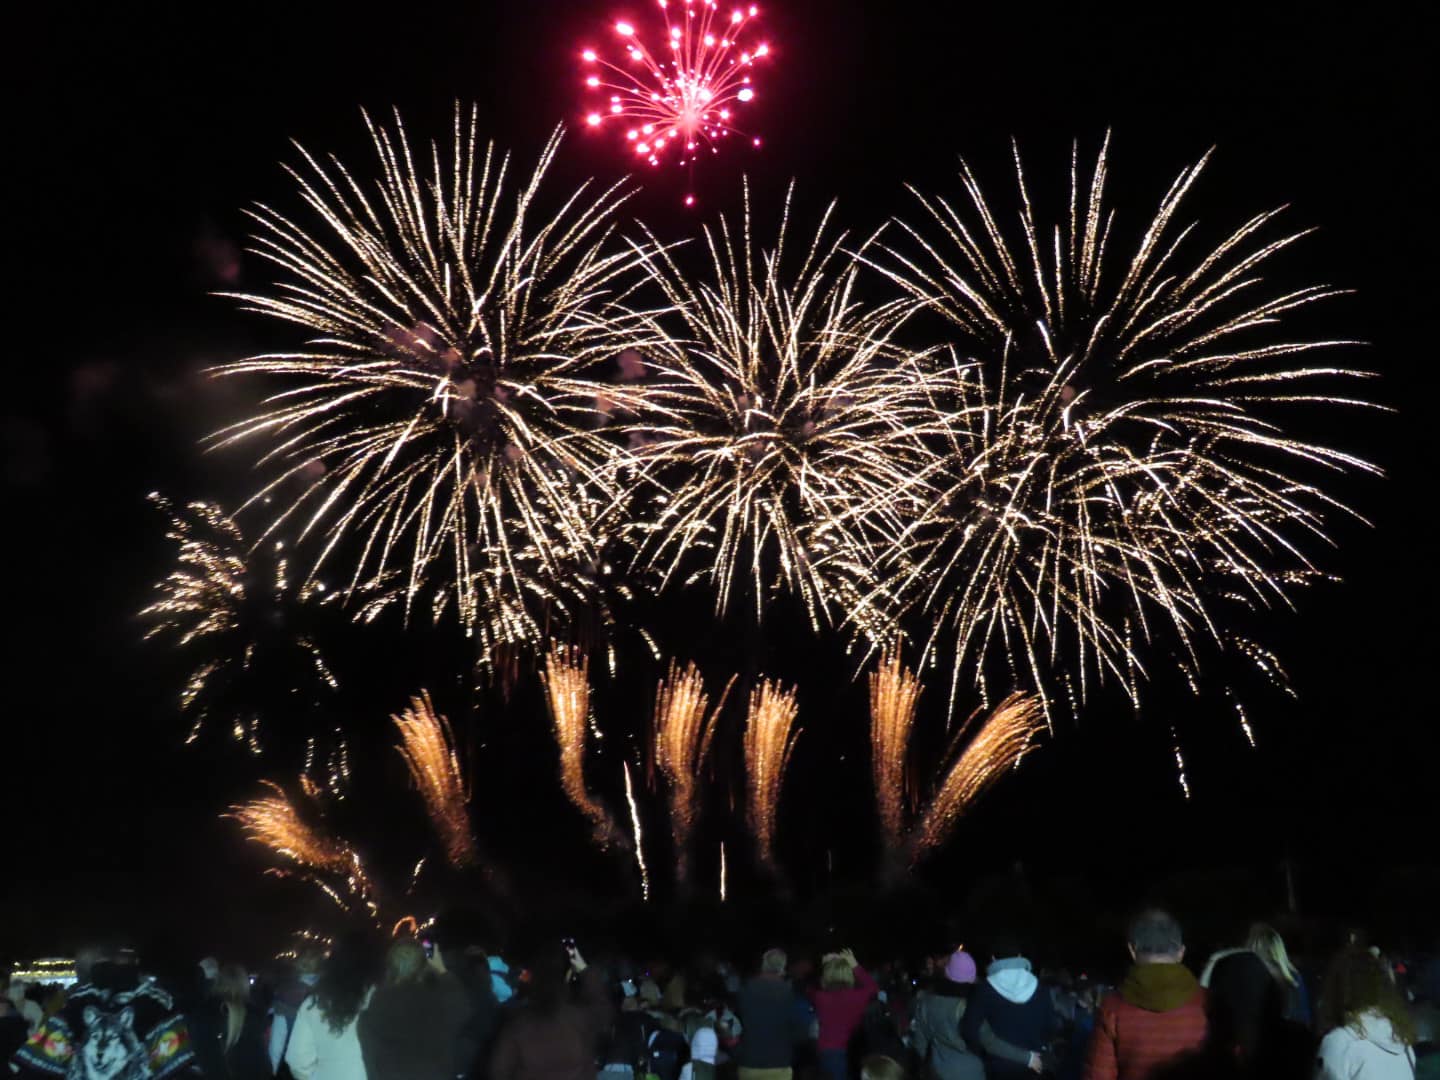 The British Musical Fireworks Championship in Southport. Photo by Andrew Brown Media